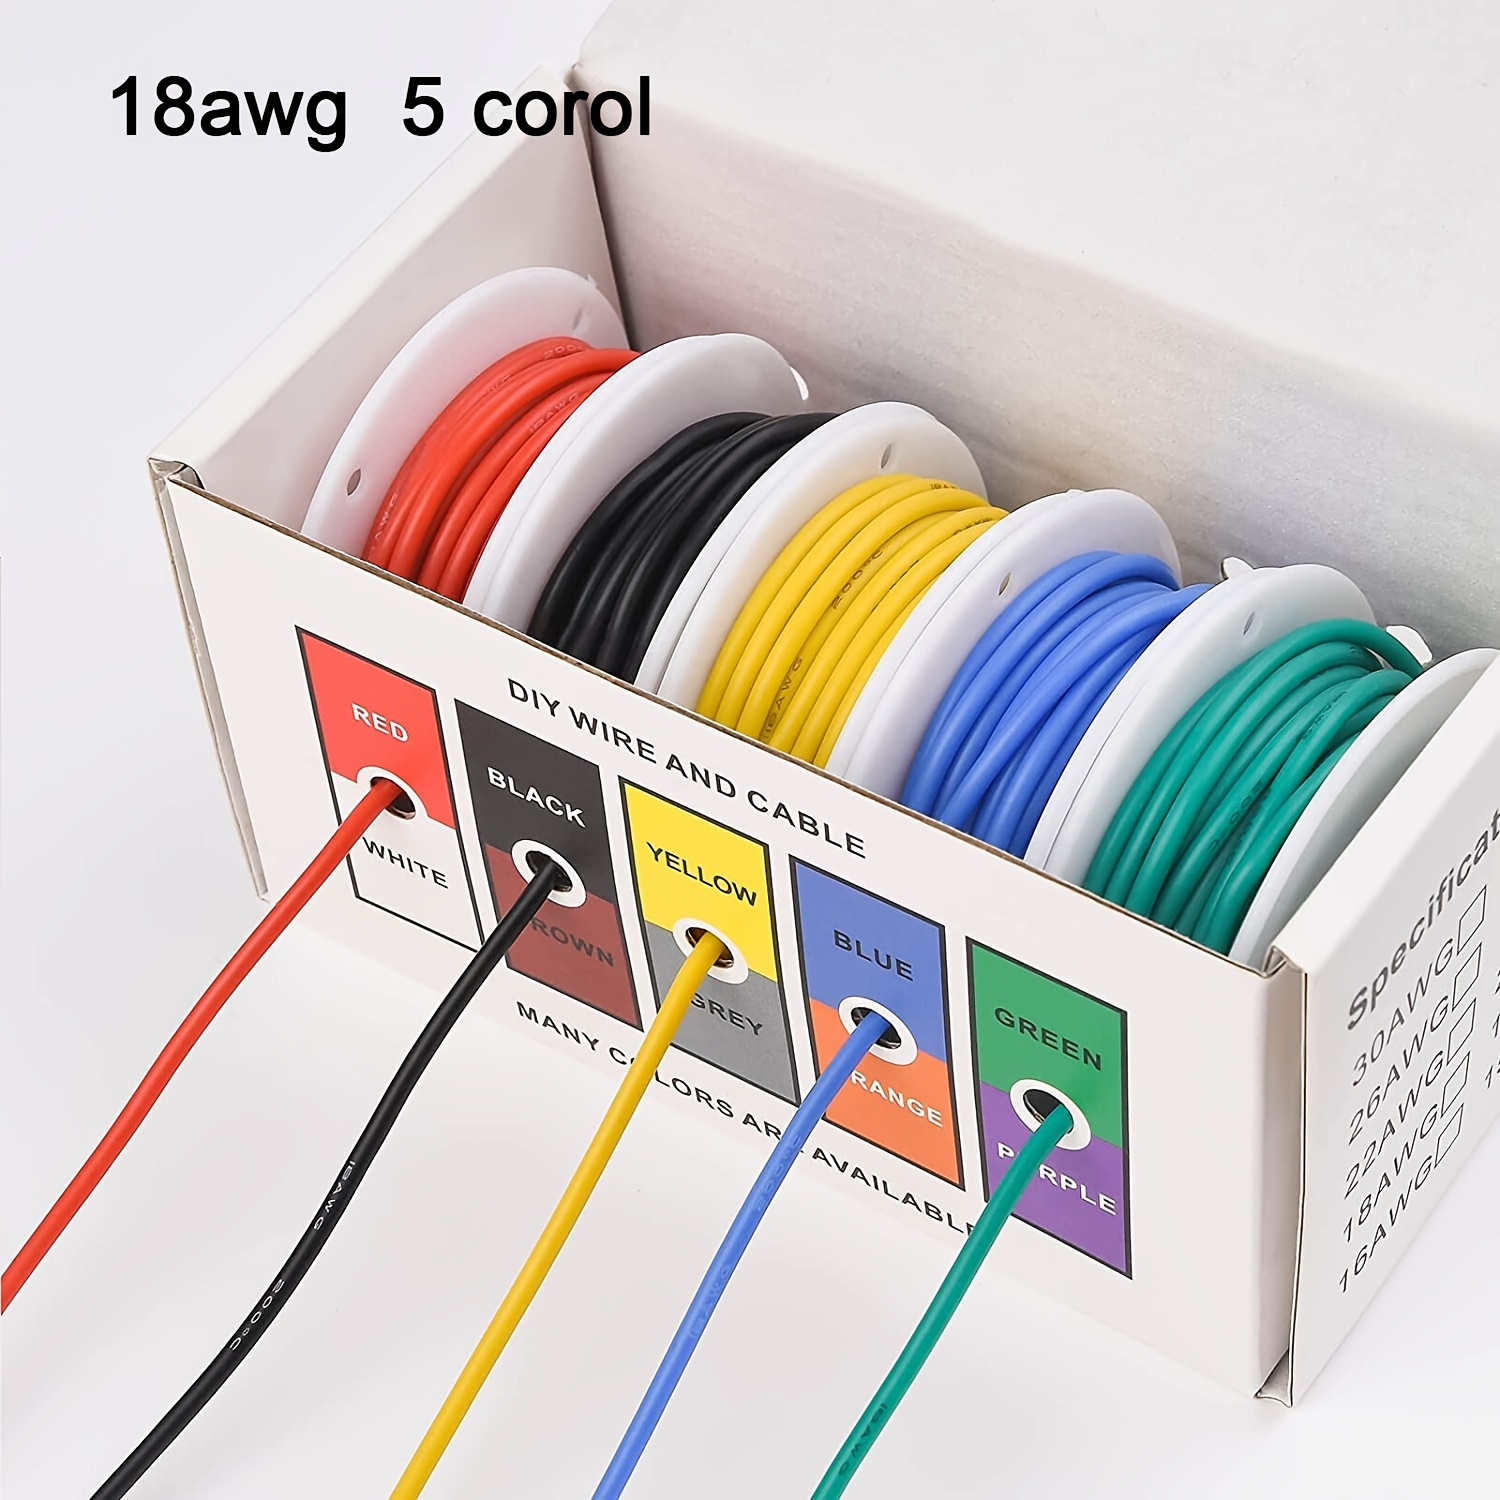 Fermerry 18 AWG Stranded Wire Spool 25ft Each 6 Colors Flexible 18 Gauge  Silicone Hook up Wire Kit Electrical Tinned Copper Wire